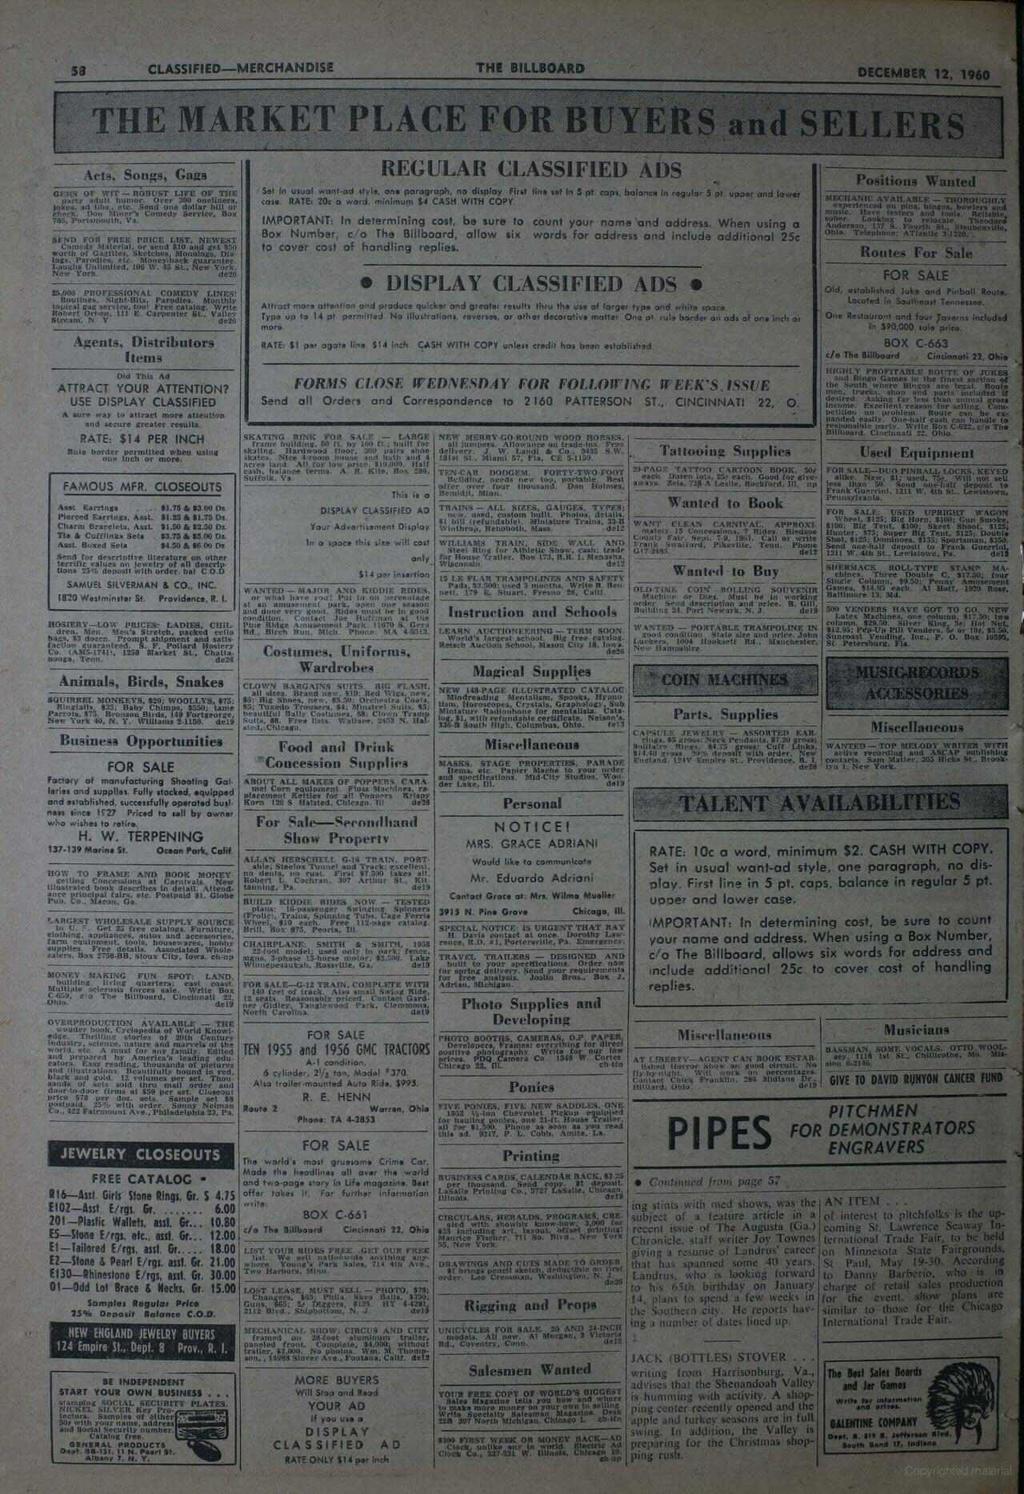 In 58 CLASSIFIED -MERCHANDISE THE BILLBOARD DECEMBER 12, 1960 THE MARKET PLACE FOR. BUYERS and SELLERS Acts, Songs, Gags t{it - ROBUST LIFE OF THE GEMS OF pncw ndull uwr. Over 300 onellnern, Send erk.